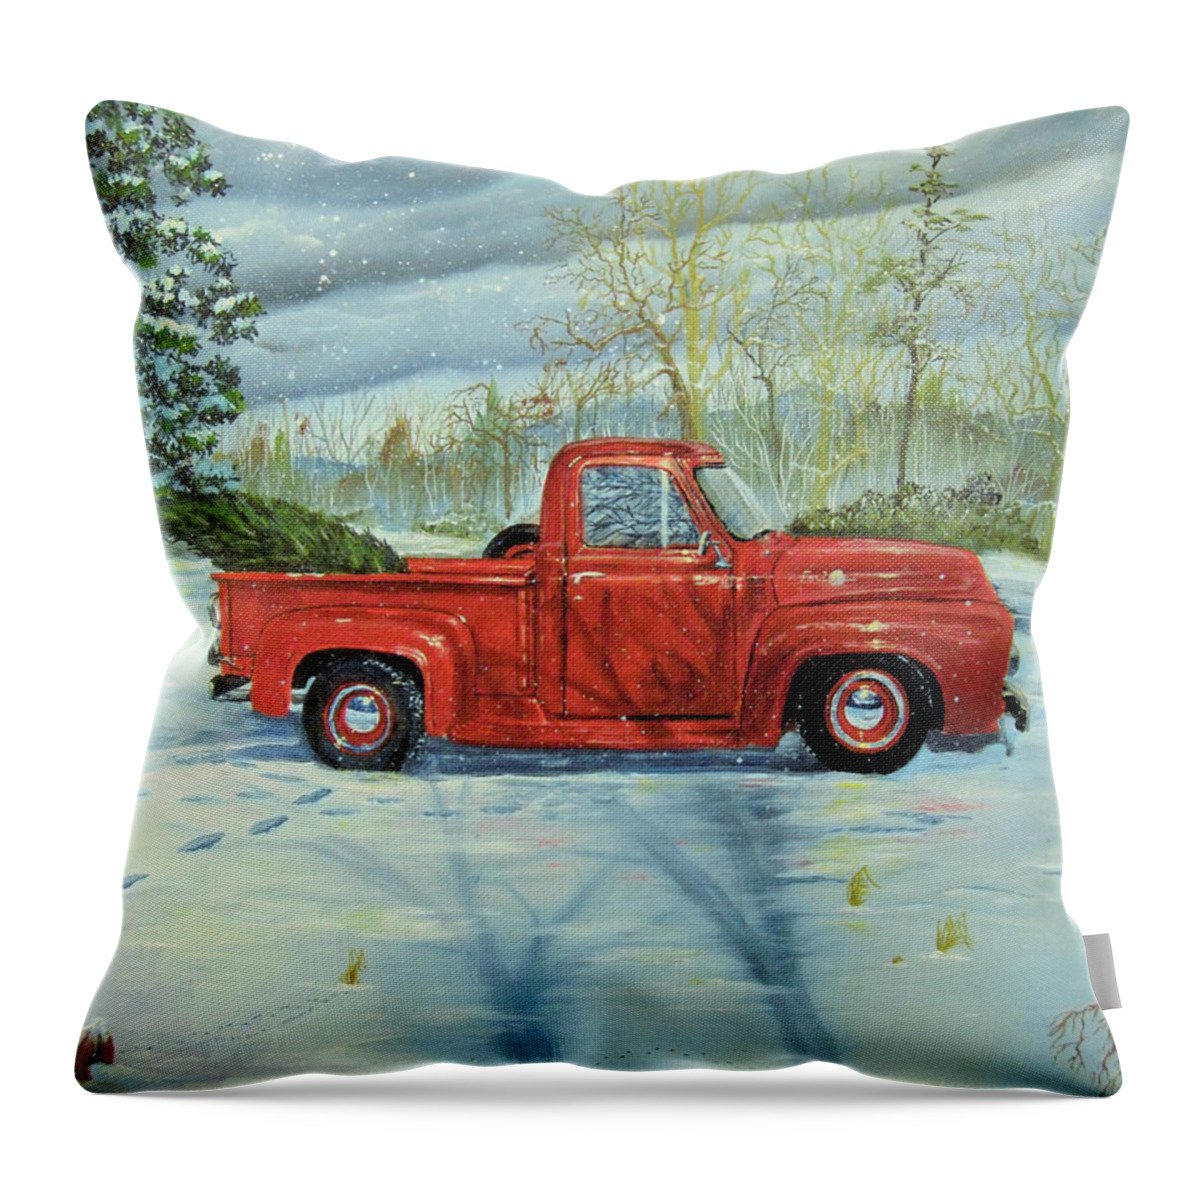 Truck Throw Pillow featuring the painting Picking Up the Christmas Tree by Nicole Angell